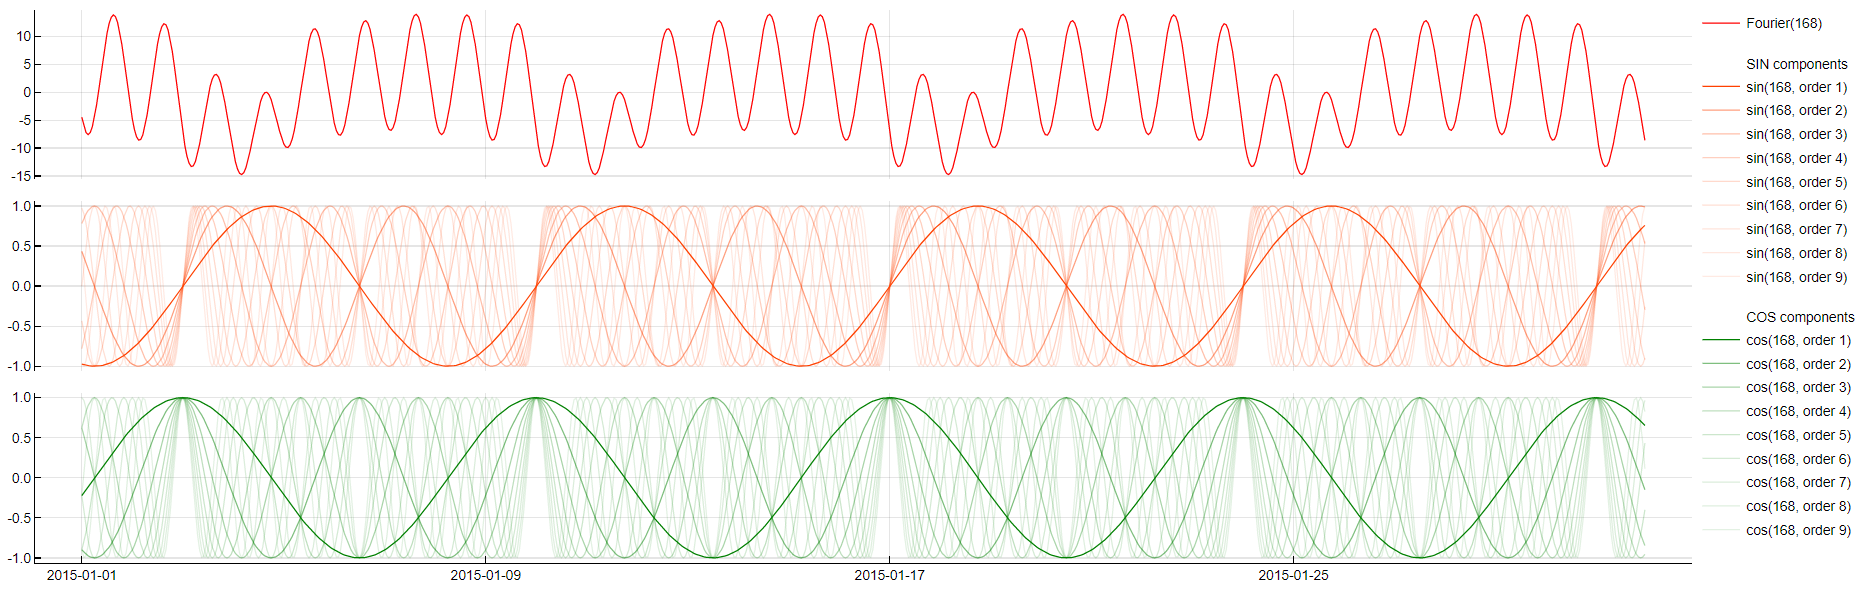 Feature-Fourier.png